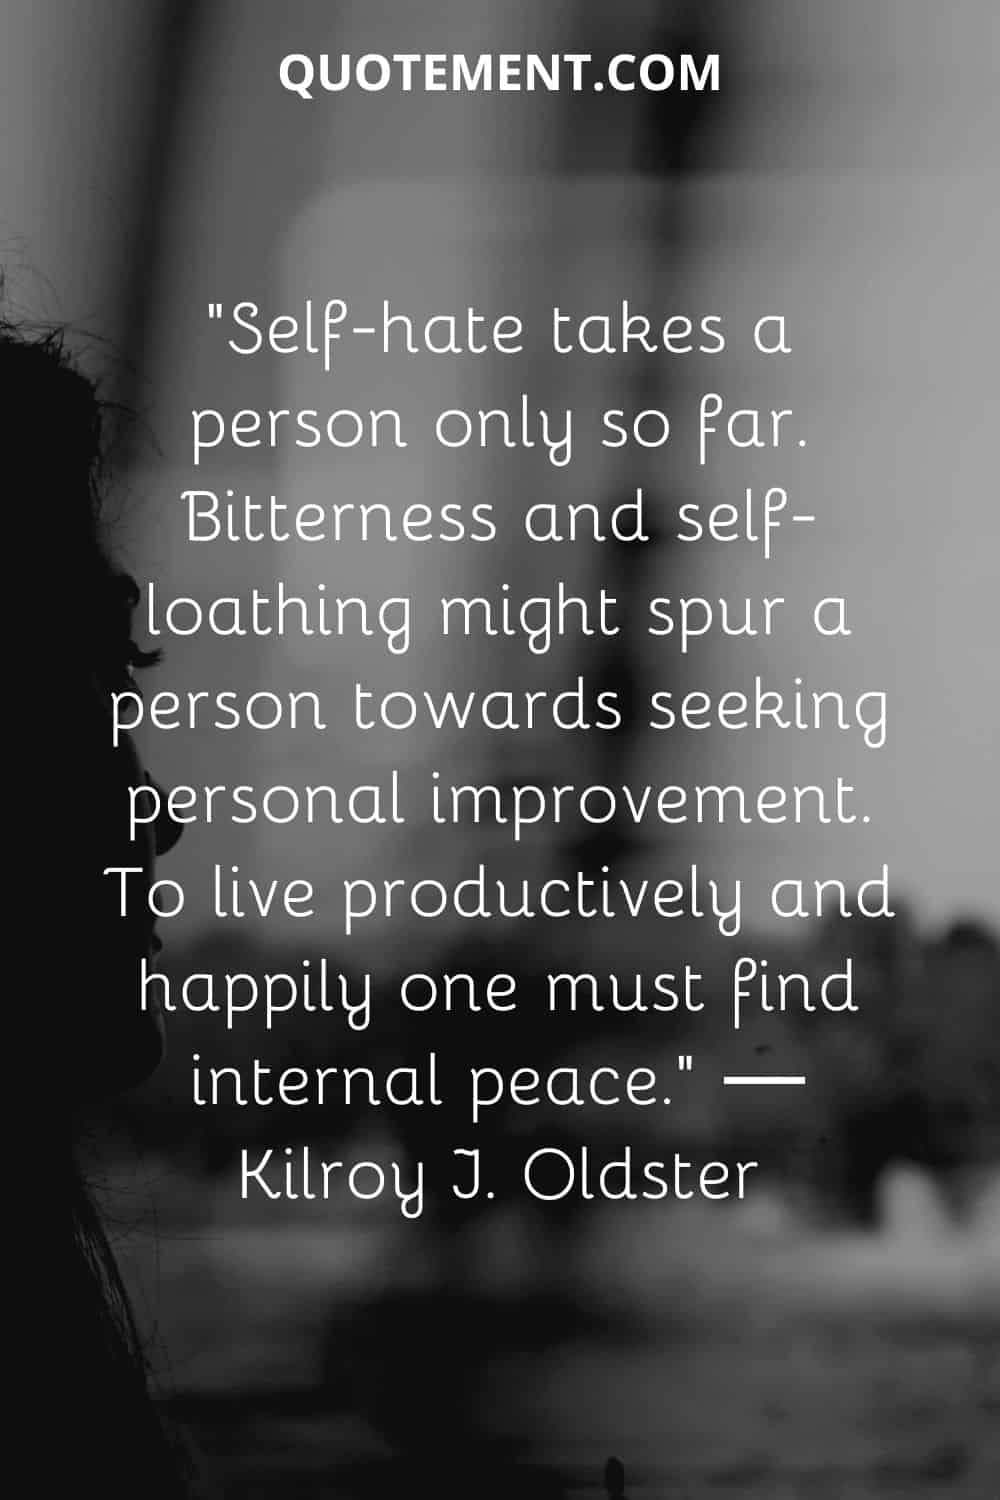 Self-hate takes a person only so far